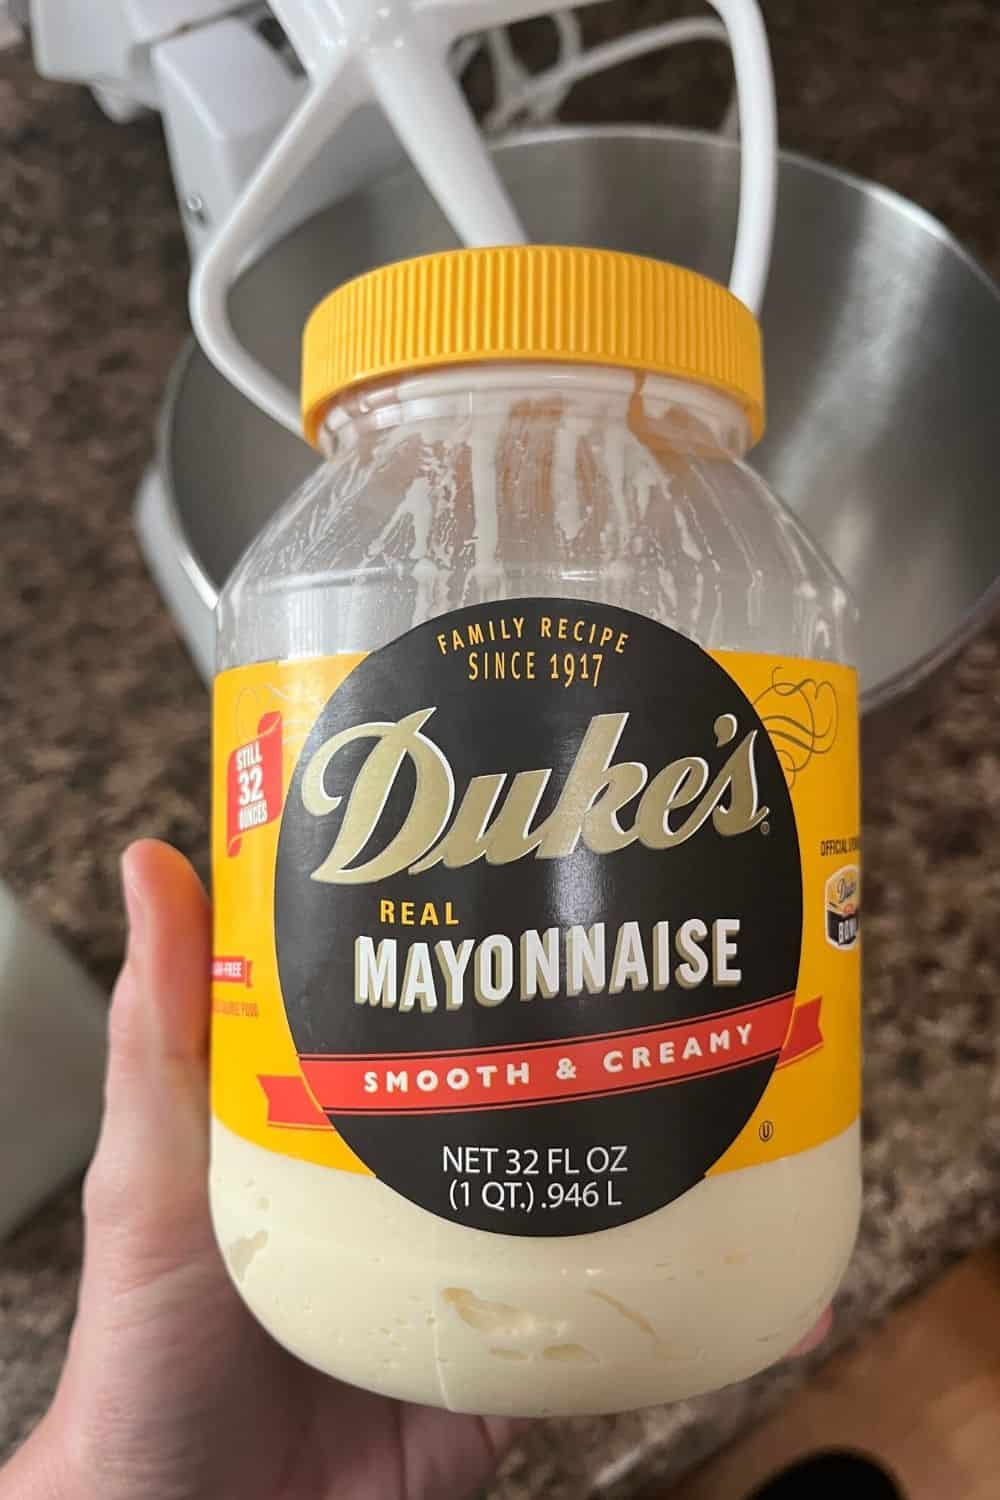 woman's hand holding a jar of Duke's real mayonnaise